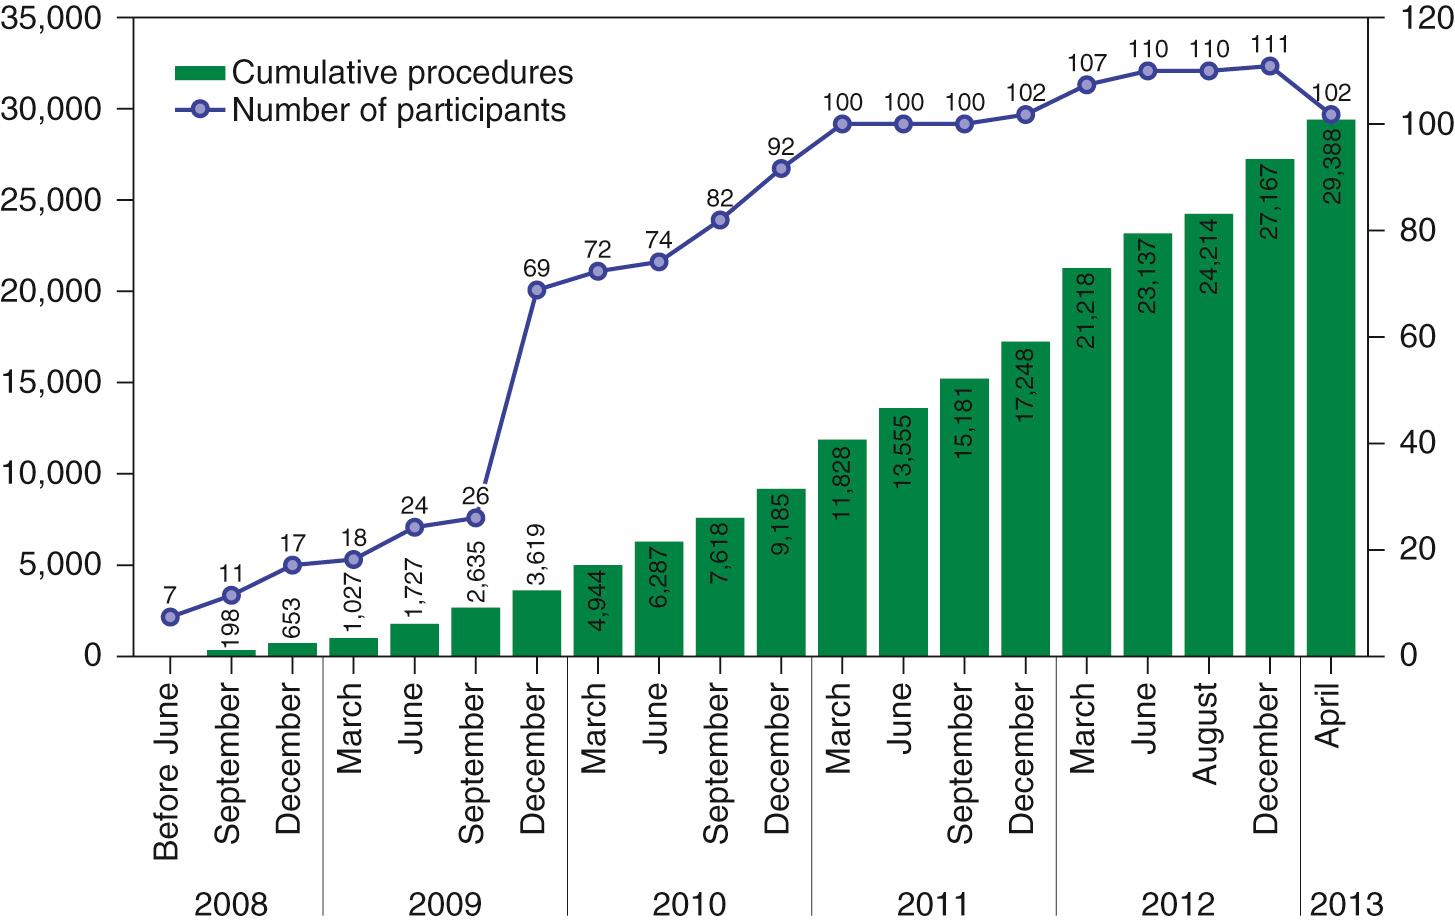 FIGURE 133-5, The initial growth of the Japan Congenital Cardiovascular Surgery Database (JCCVSD). The JCCVSD has recently been operationalized based on identical nomenclature and database standards as that used by the European Association for Cardio-Thoracic Surgery and the Society of Thoracic Surgeons. The JCCVSD began enrolling patients in 2008. By December 2011, more than 100 hospitals were submitting data, and by April 2013, more than 29,000 operations were entered into the JCCVSD, in just under 5 years of data collection. The developers of the JCCVSD hope to collaborate with their colleagues across Asia to create an Asian Congenital Heart Surgery Database.